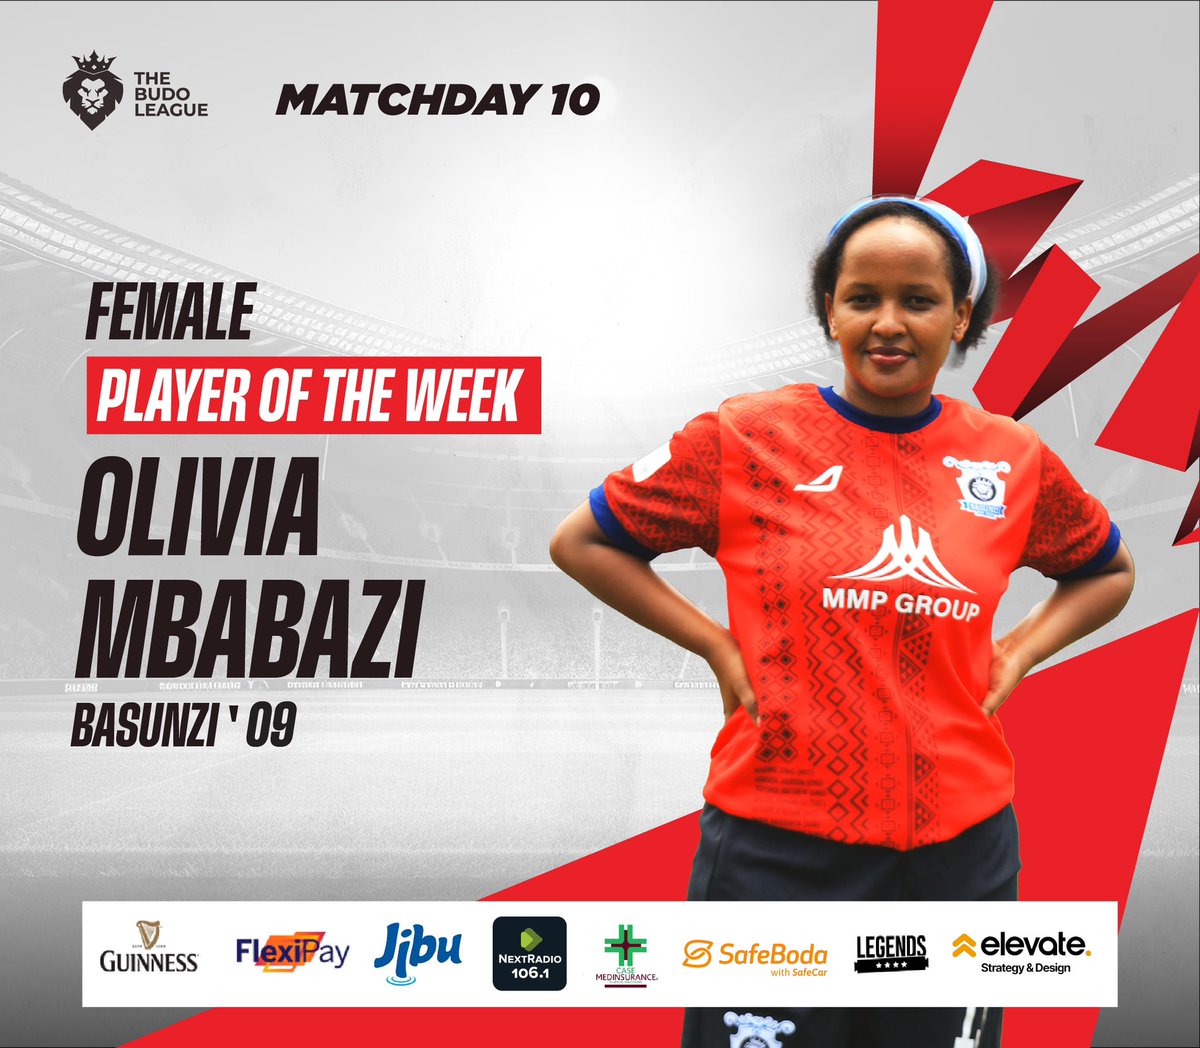 Debut Checklist:
Goal✅
Win✅
Player of the week✅

Masterclass from Olivia!

#TBL7 
#TheBasunziway